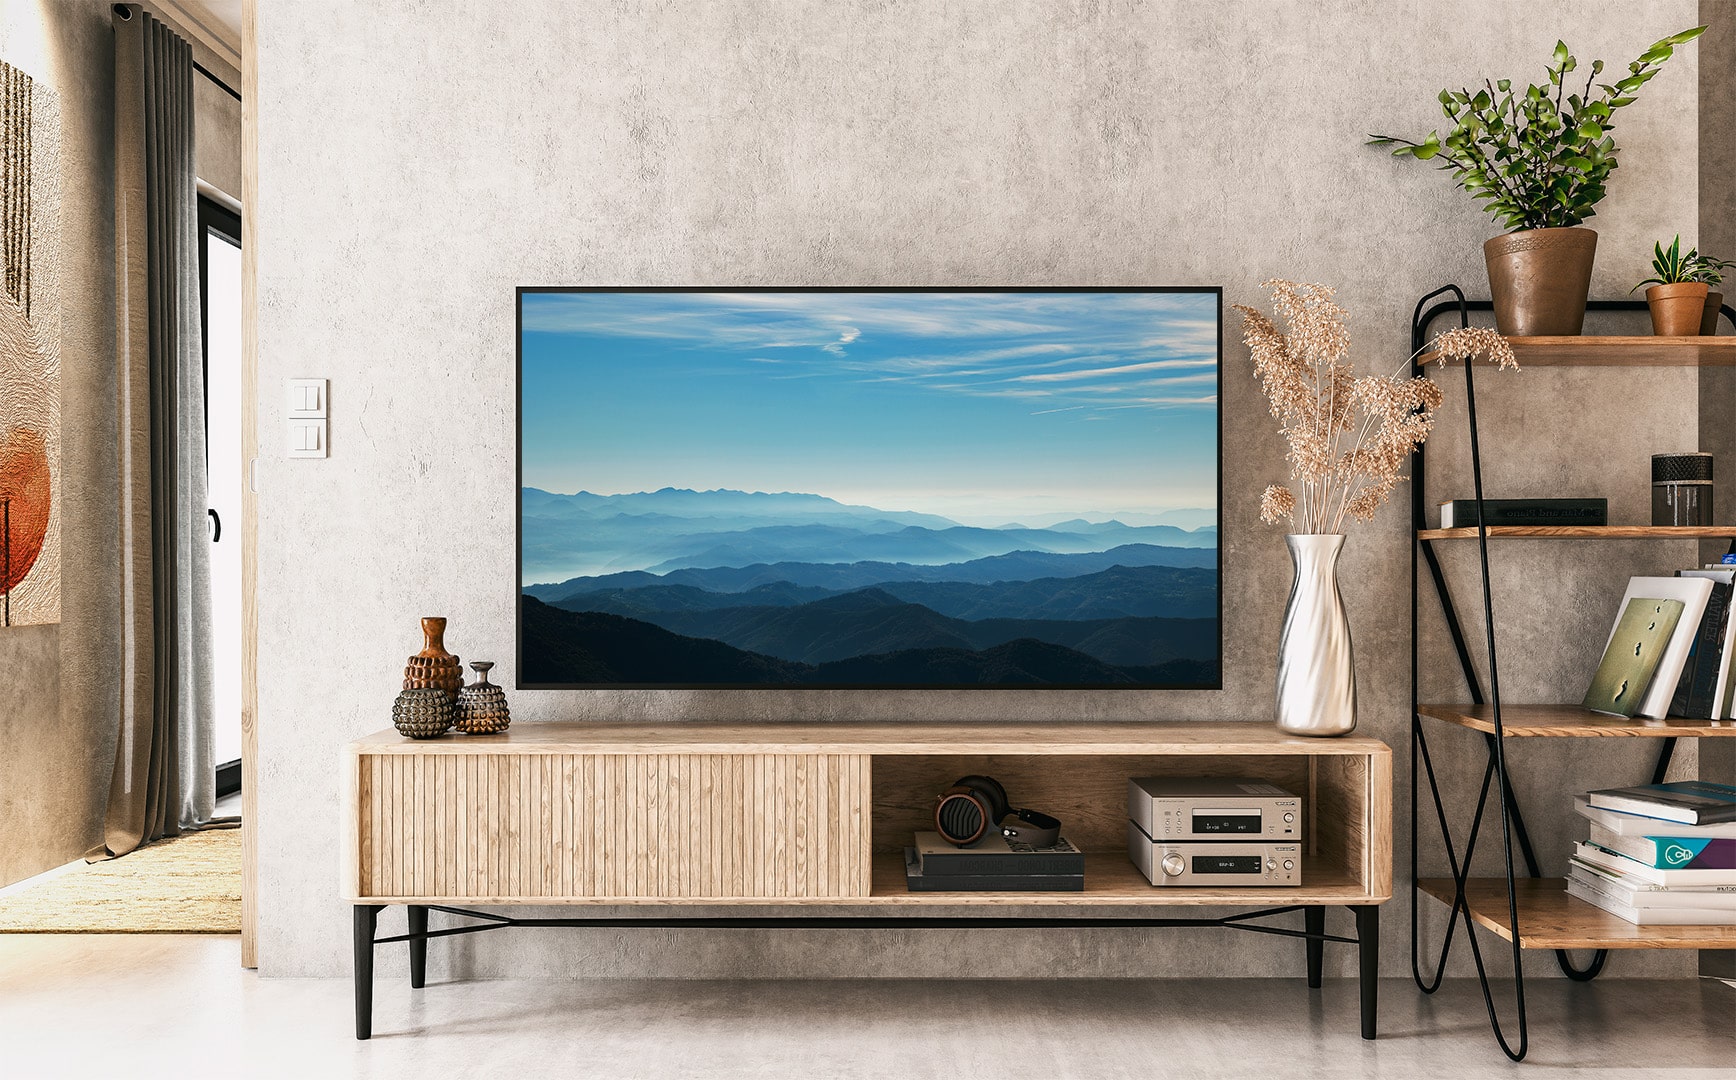 Blue mountains and sky on tv background in nice home